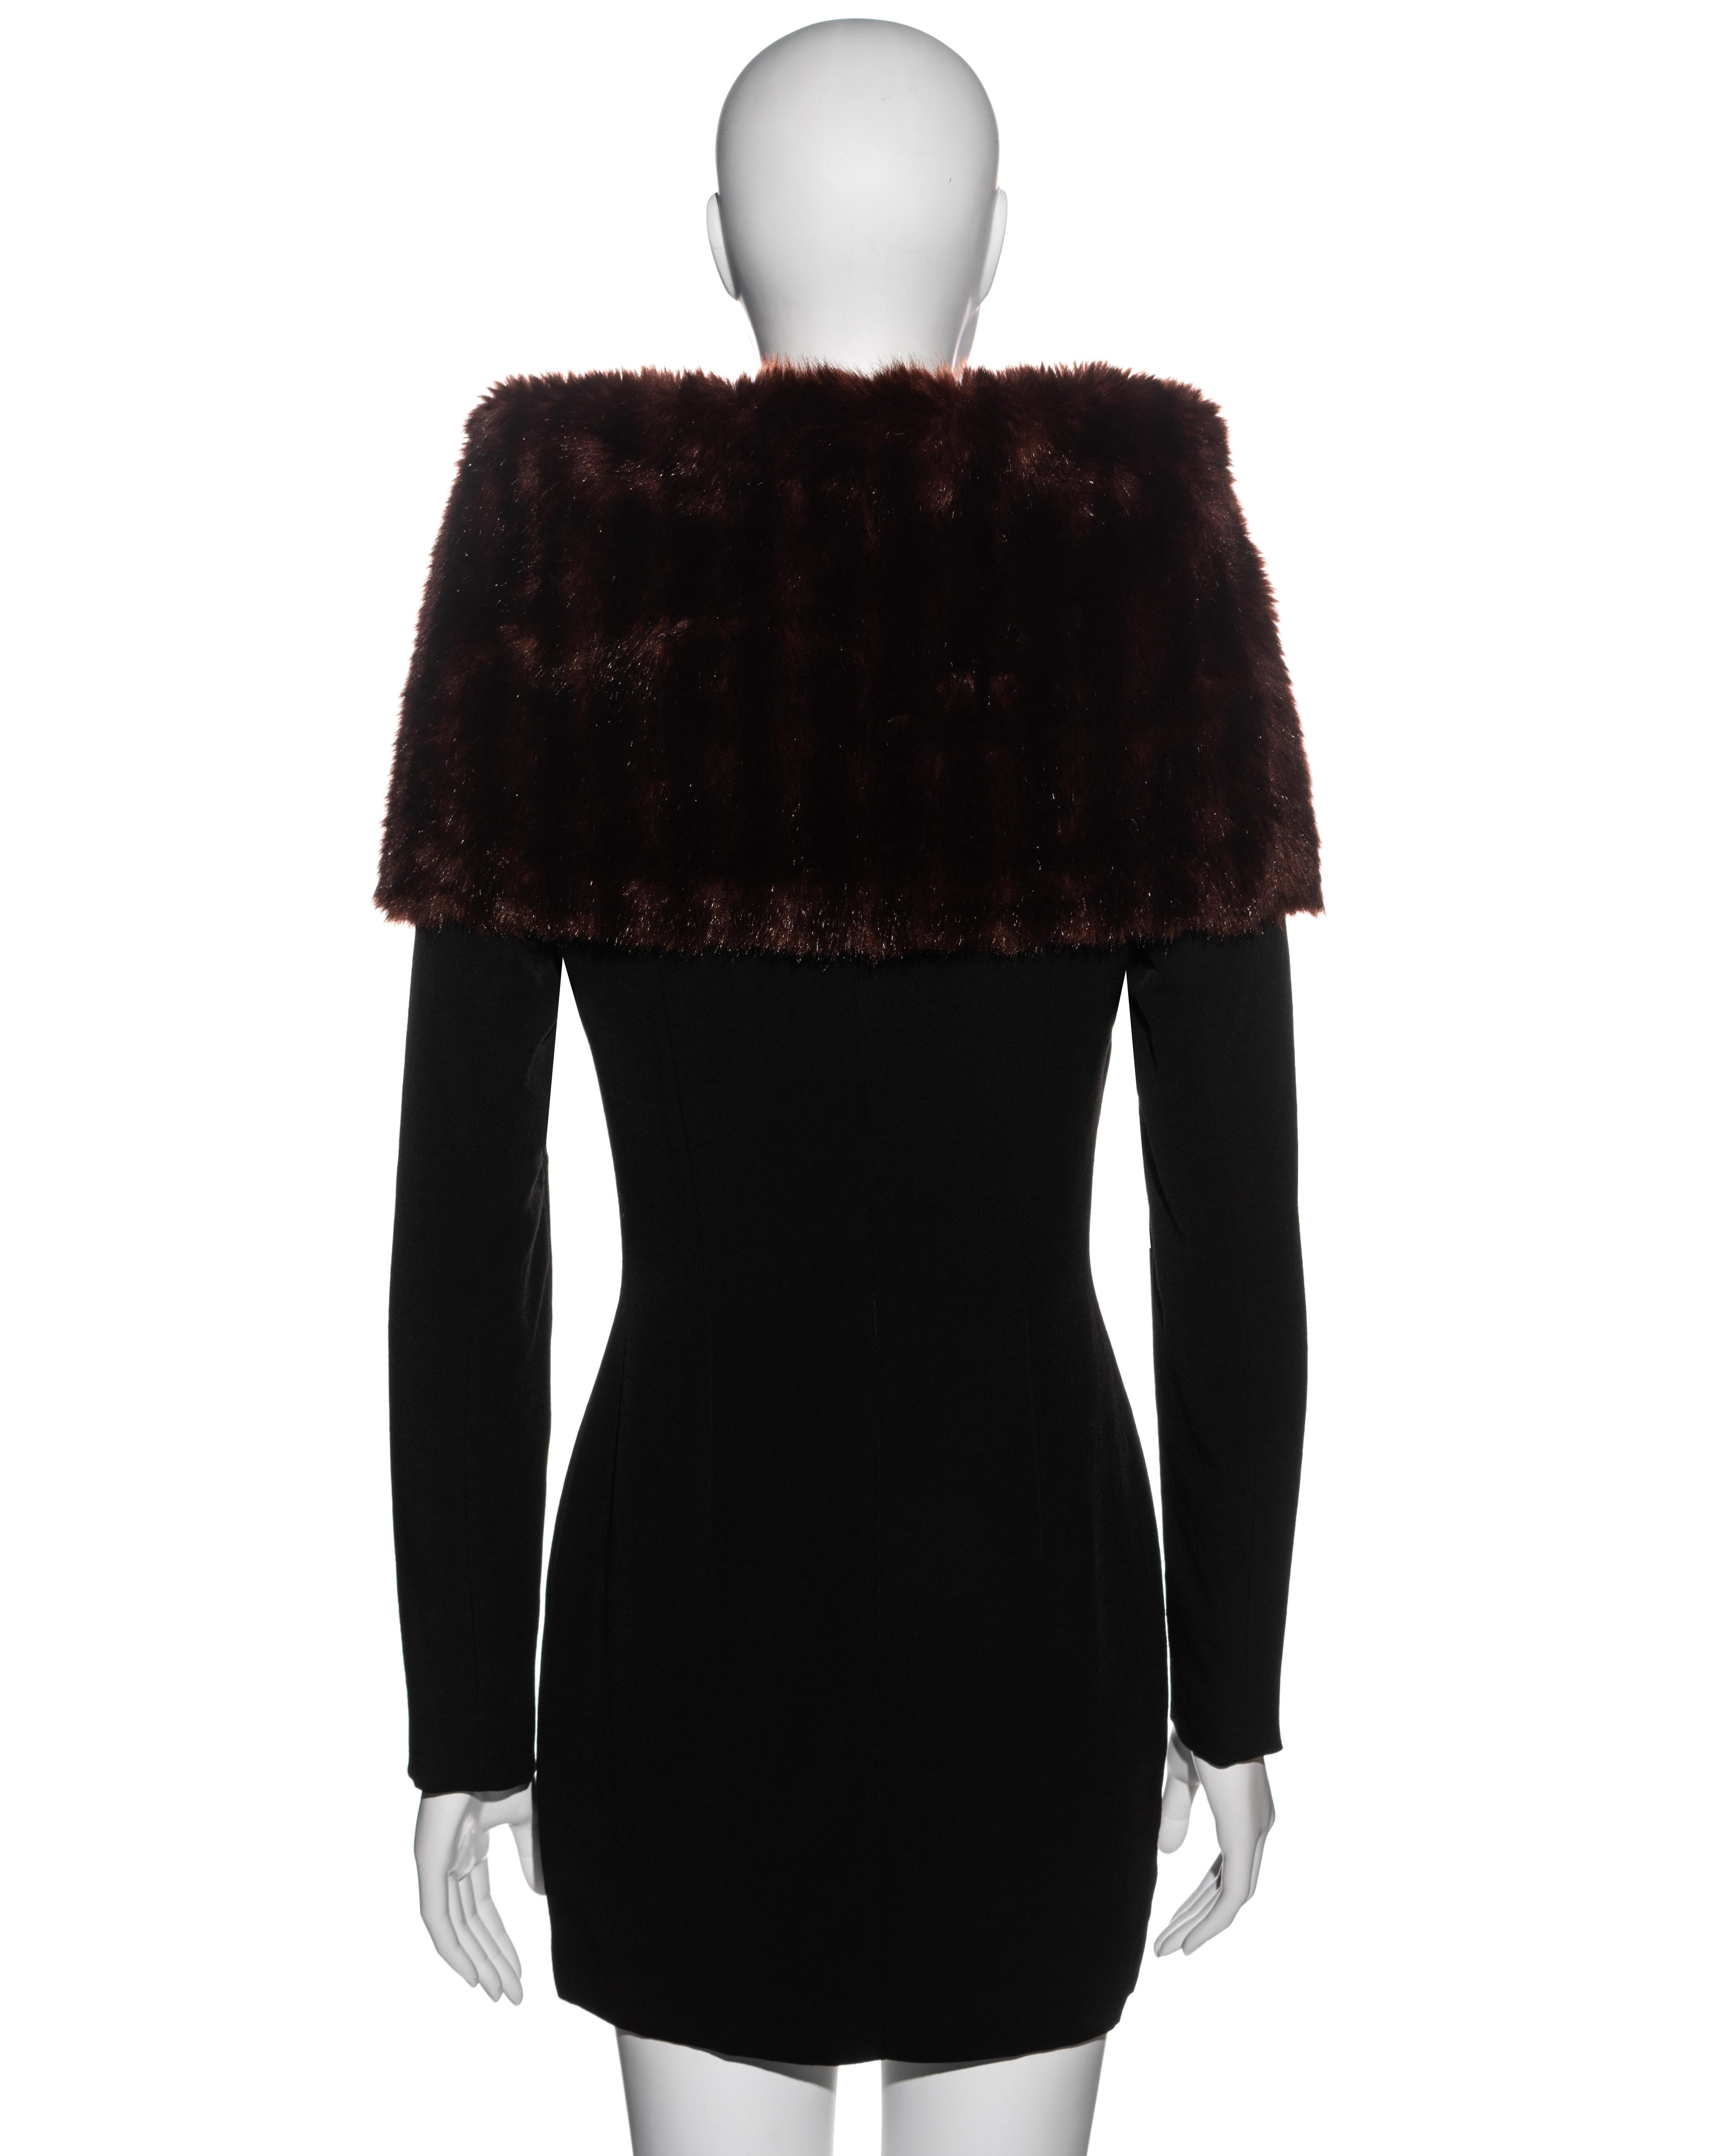 Dolce & Gabbana black wool mini dress with faux fur funnel neck, fw 1995 In Excellent Condition For Sale In London, GB